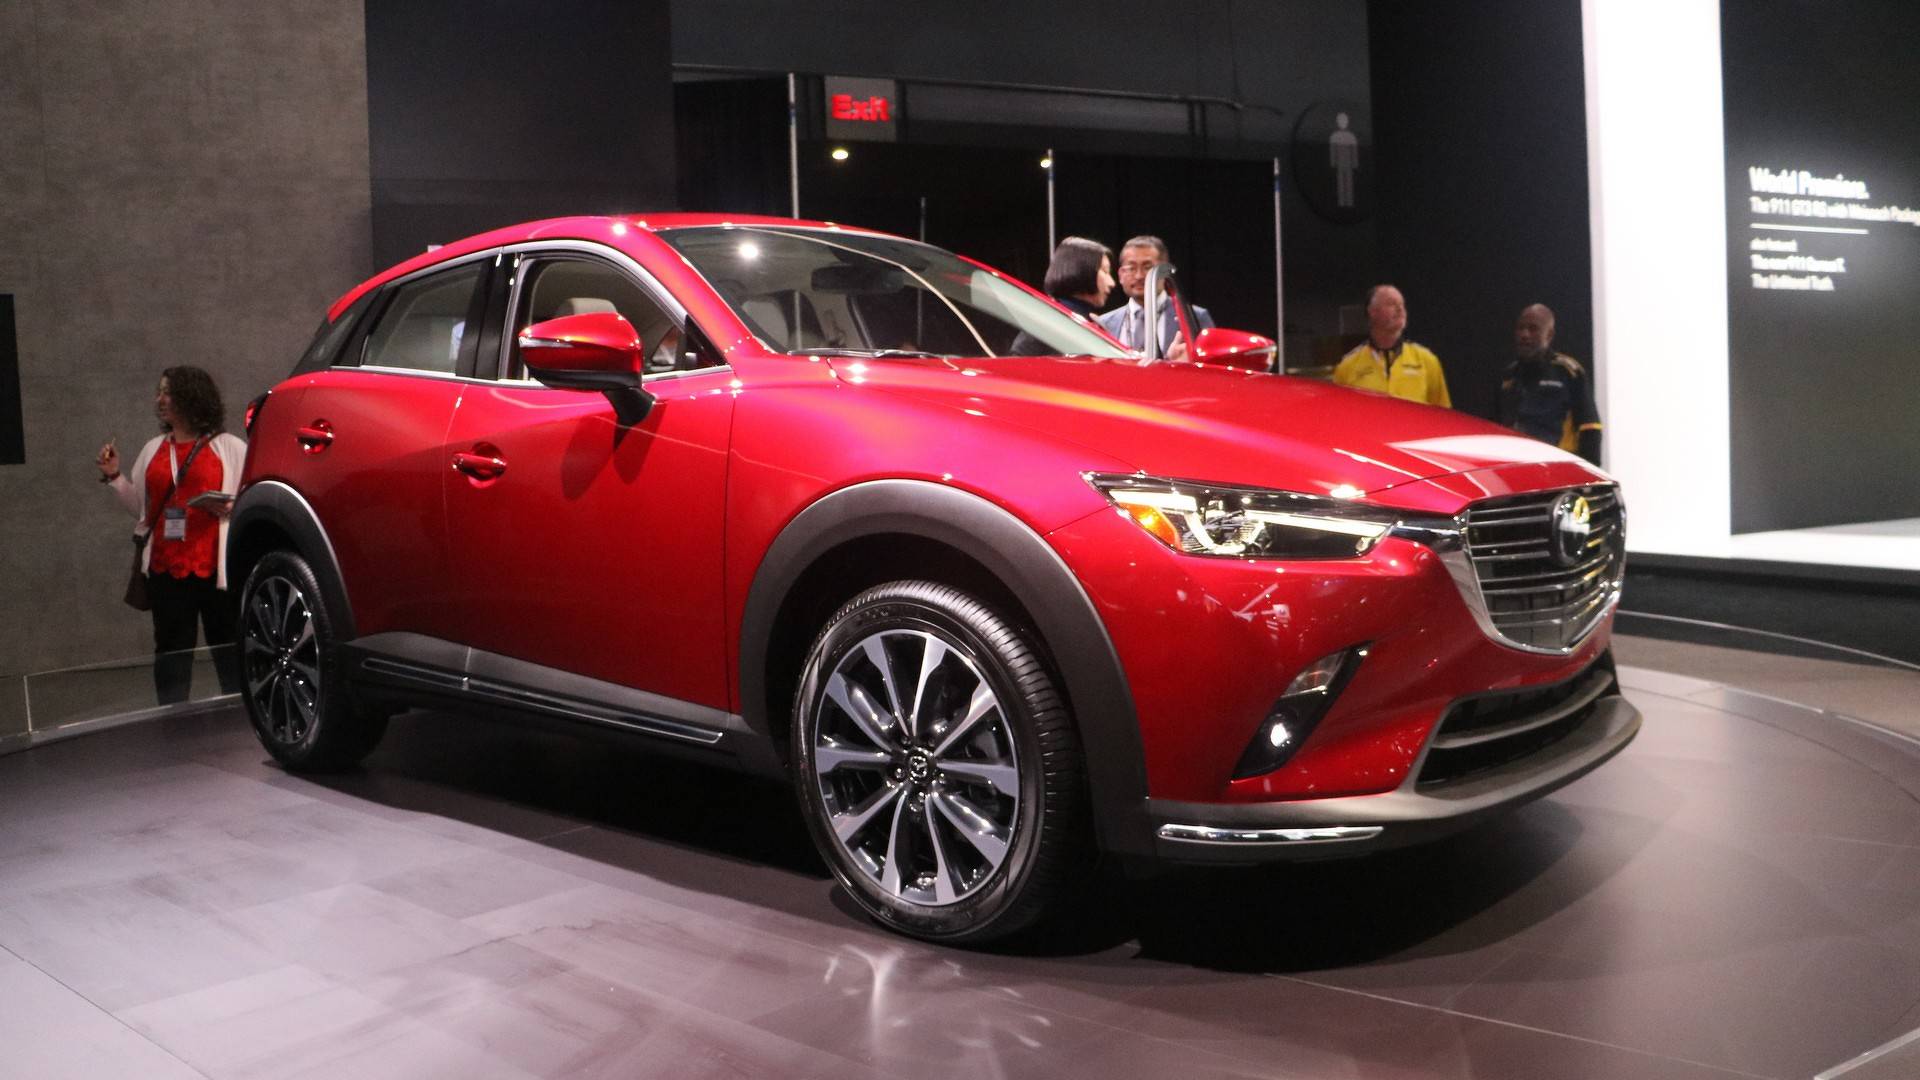 2019 Mazda CX-3 Debuts With 148 HP And Improved Interior